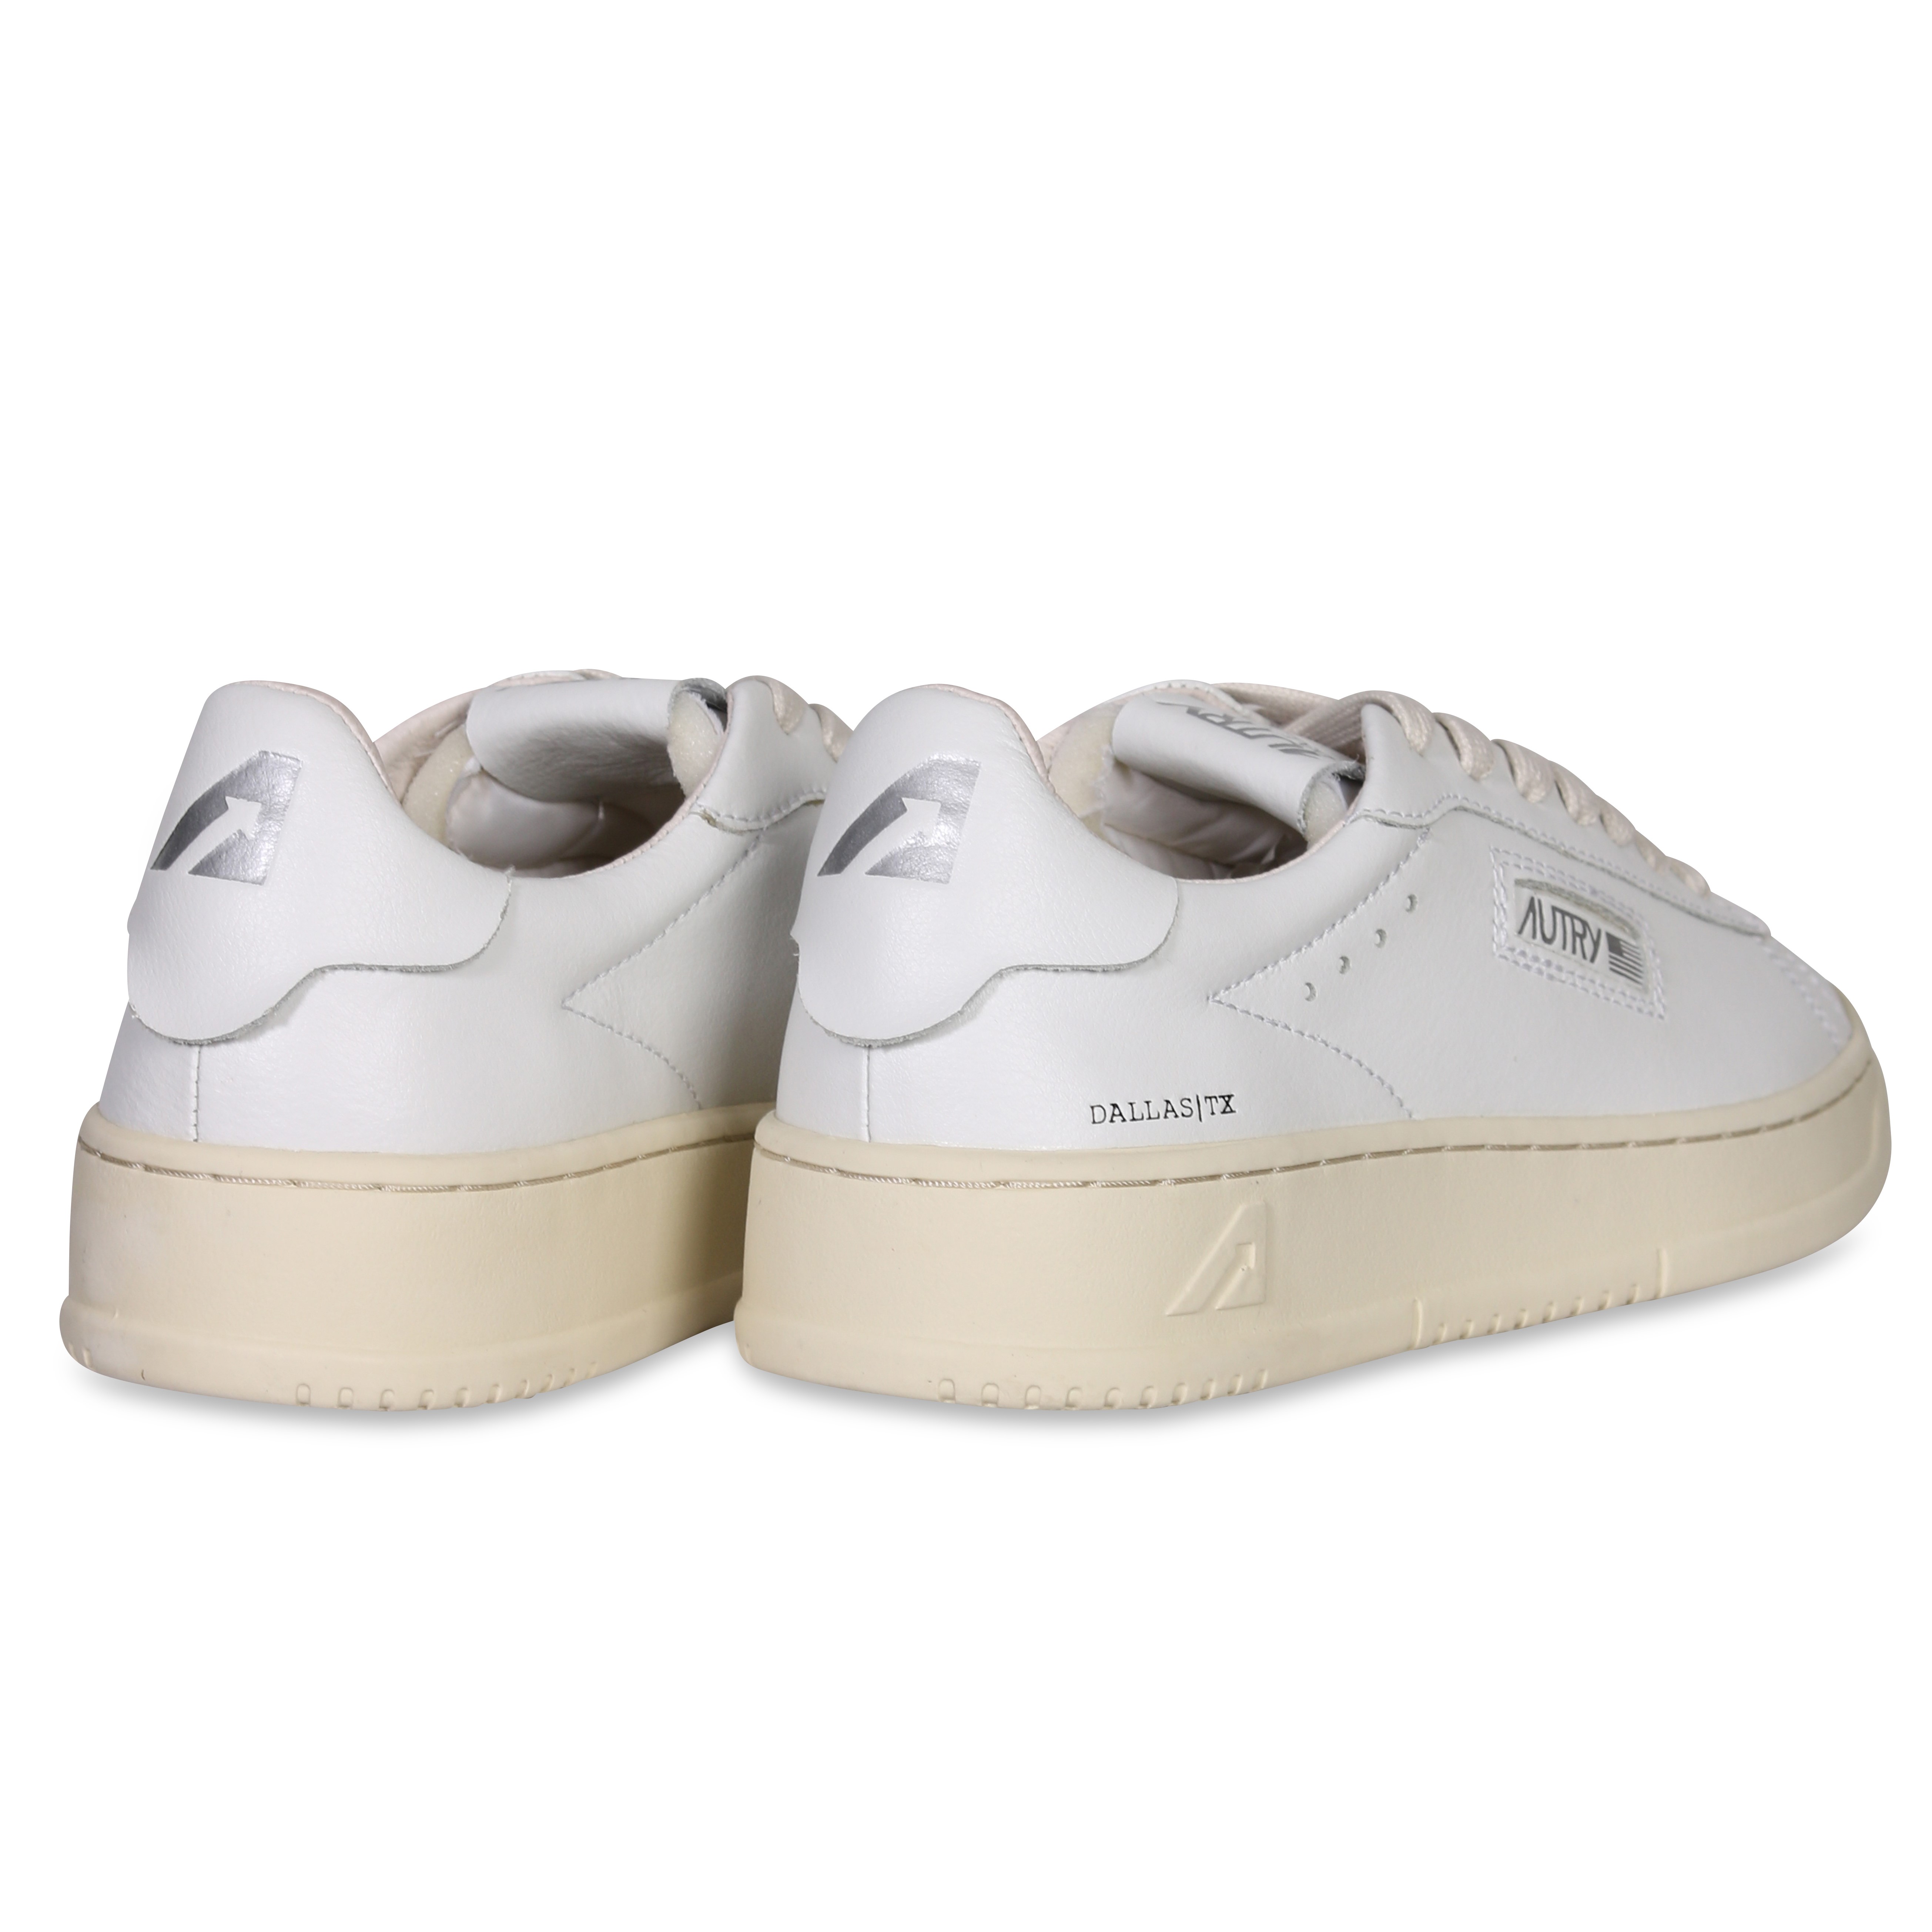 Autry Action Shoes Dallas Low Sneaker White/Silver